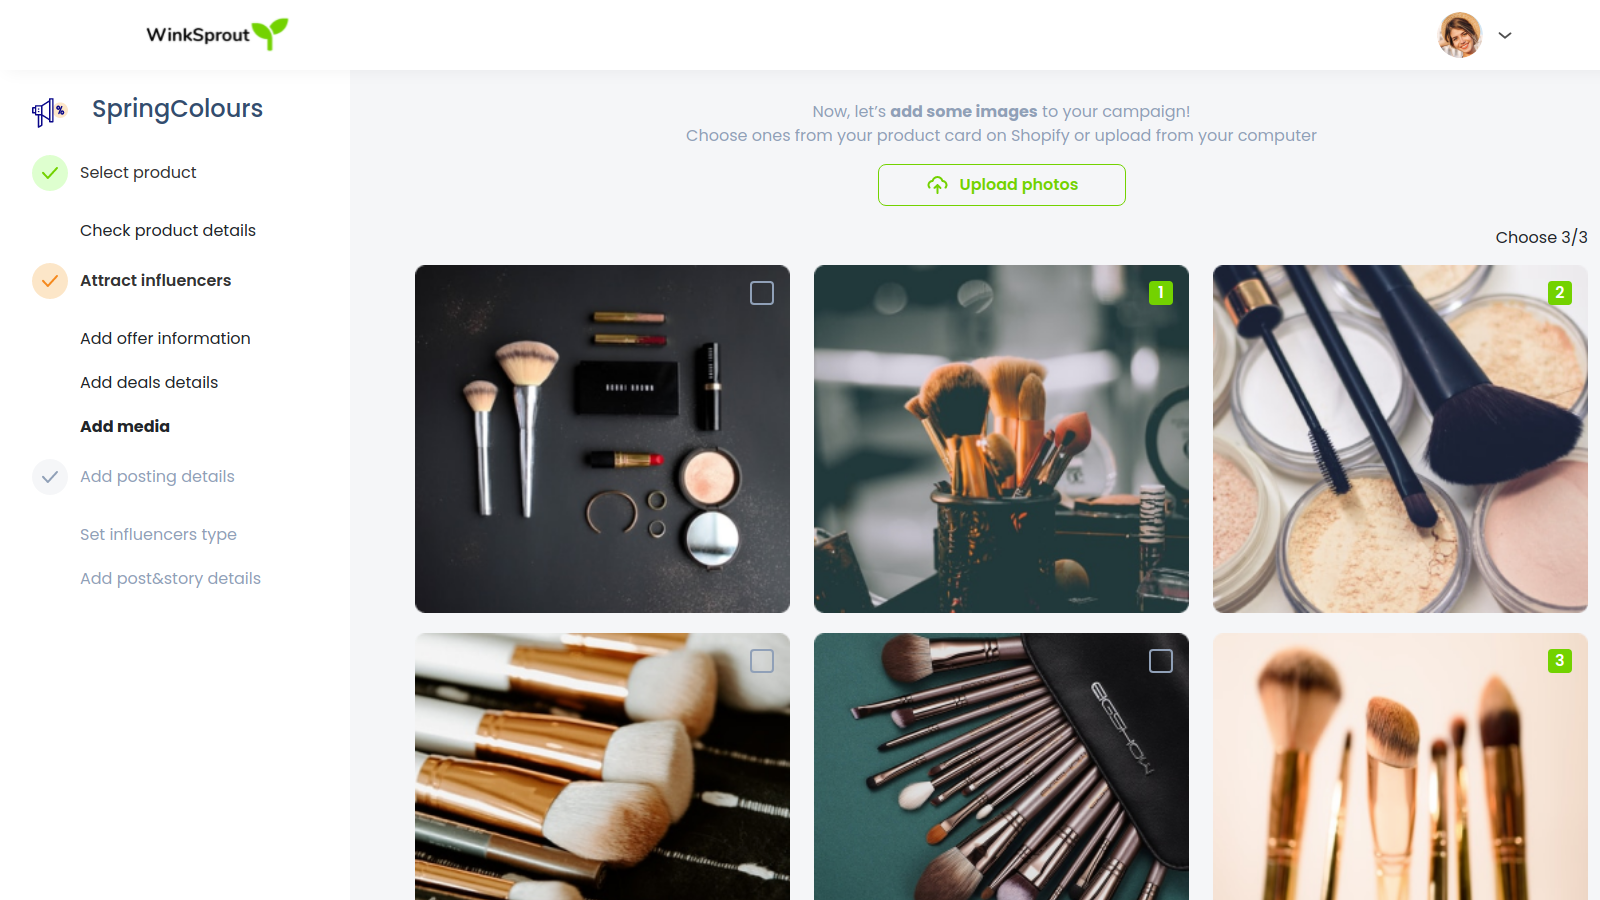 Use your product's images directly from Shopify